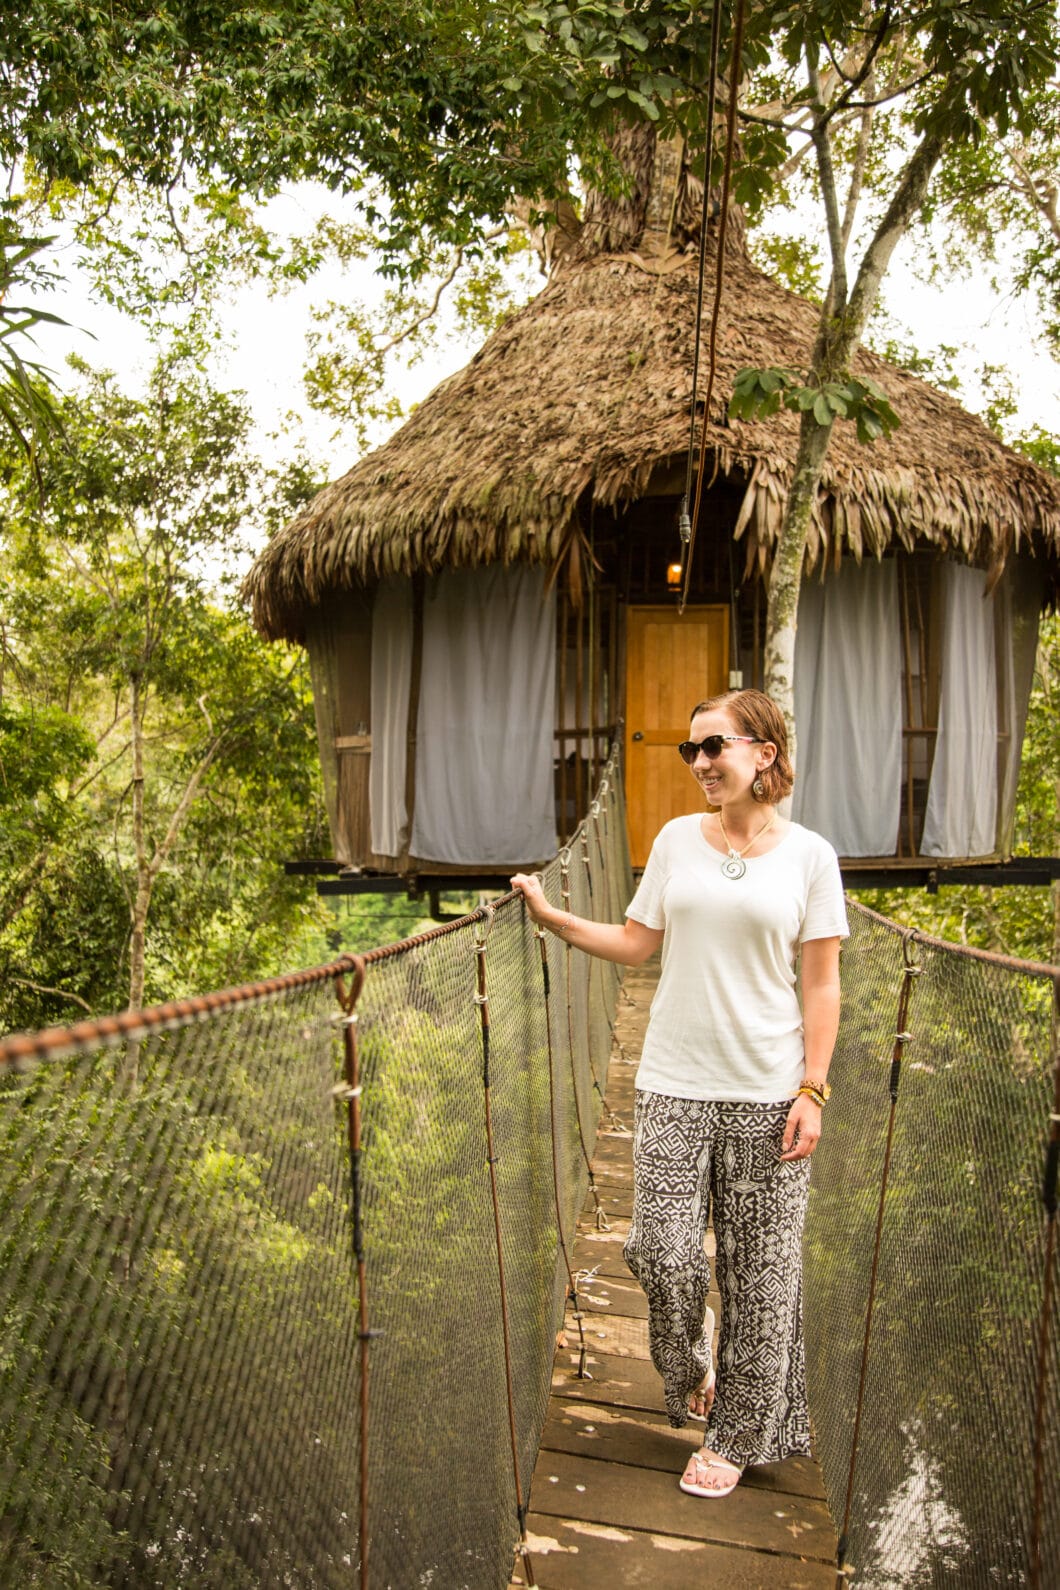 A woman walks along a wooden footbridge connected to a hut surrounded by tropical forest. She's wearing a white short-sleeve shirt and flowy blank and white patterned pants and matching accessories.